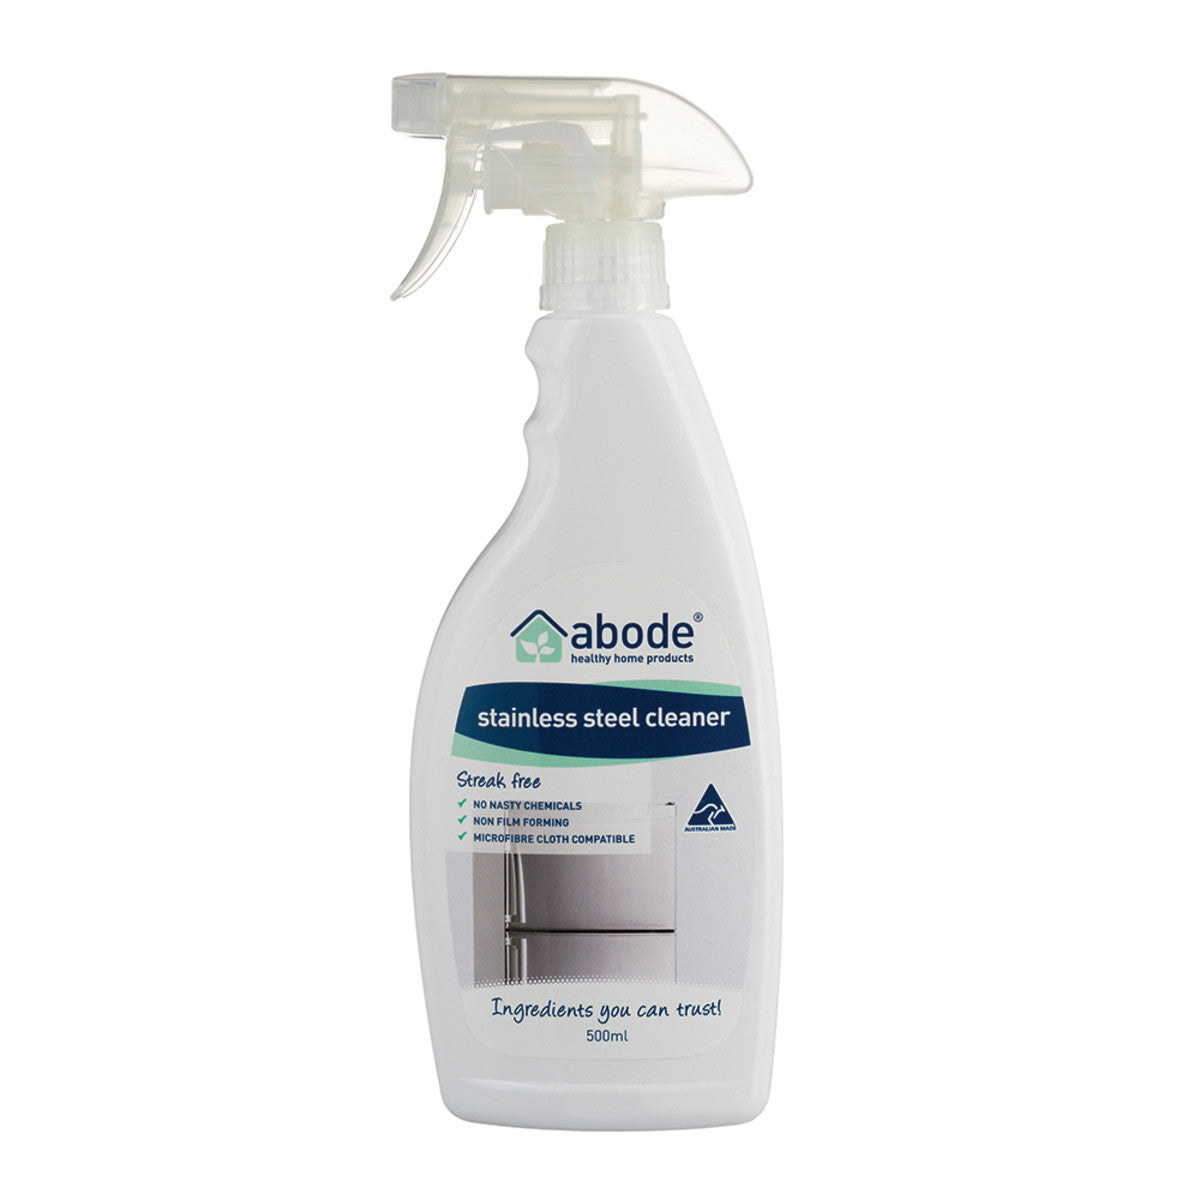 Abode - Stainless Steel Cleaner Spray